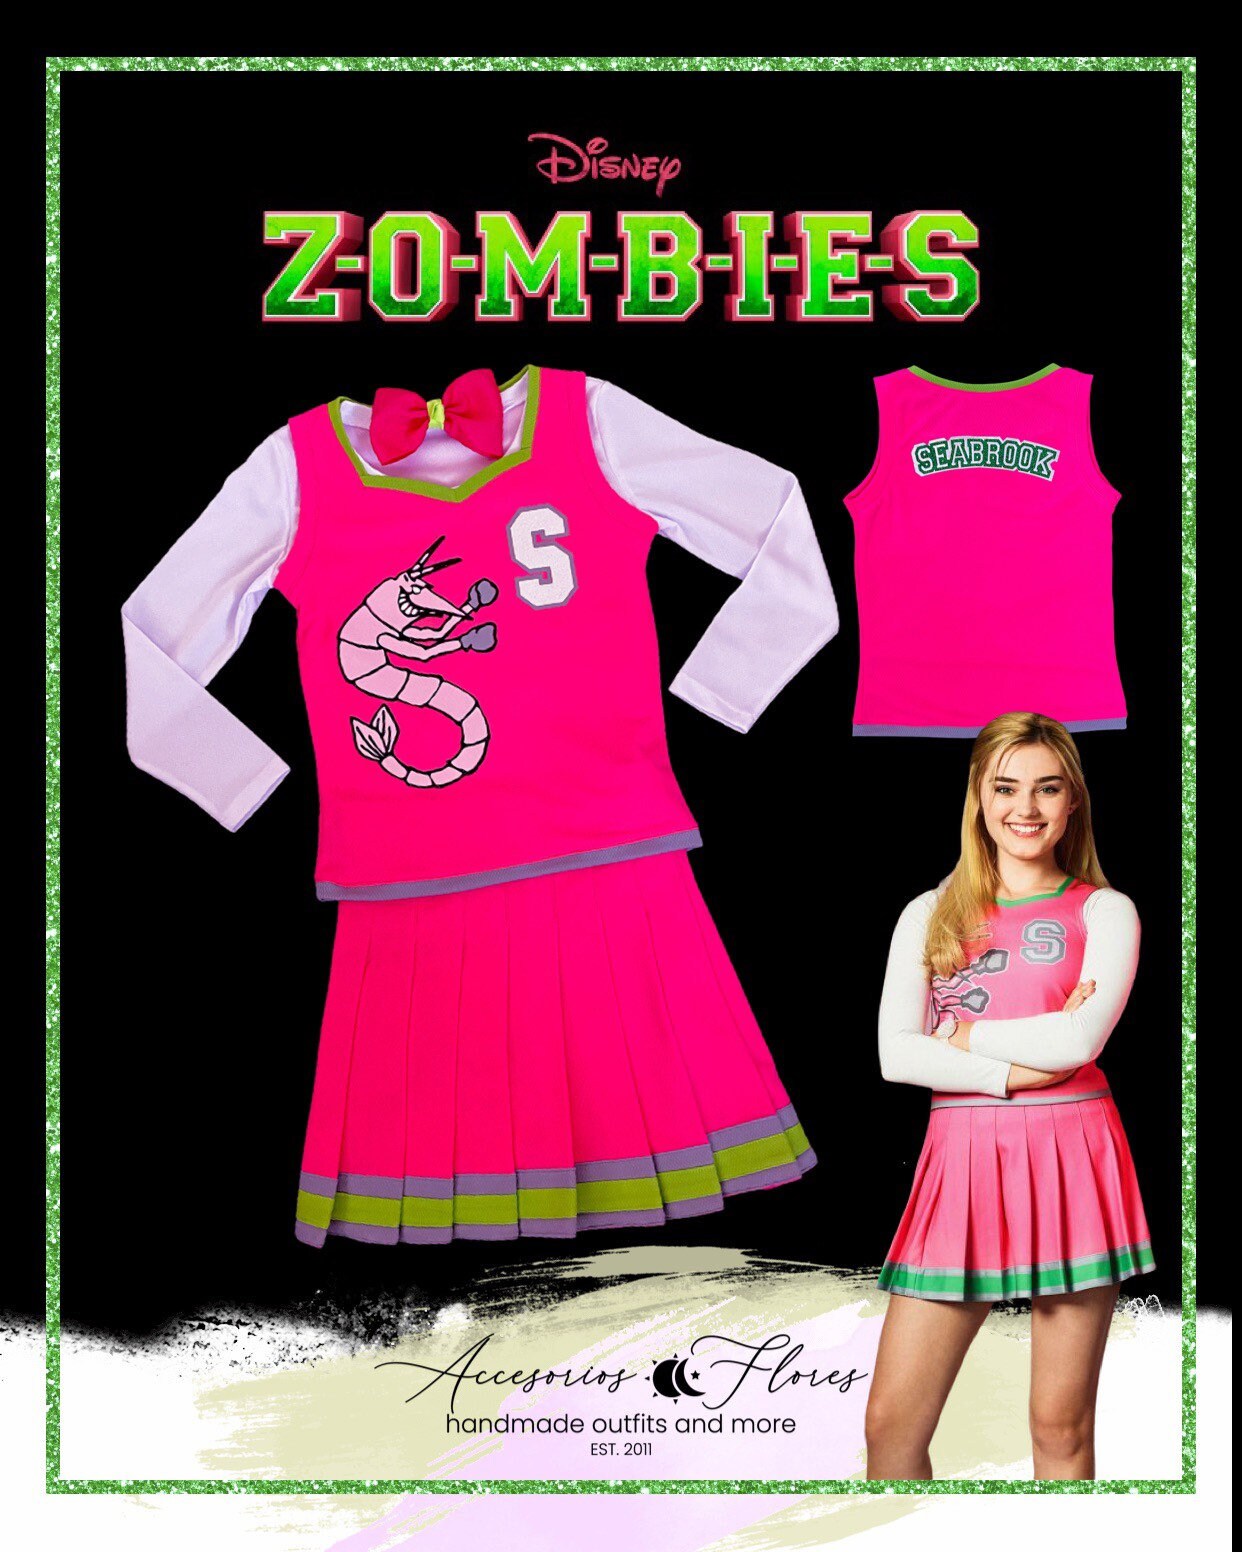 Maogou Girls Costume Zombies Addison Cheerleader Toddler Rose Dress with Cheerleader Poms and Hair Rope 